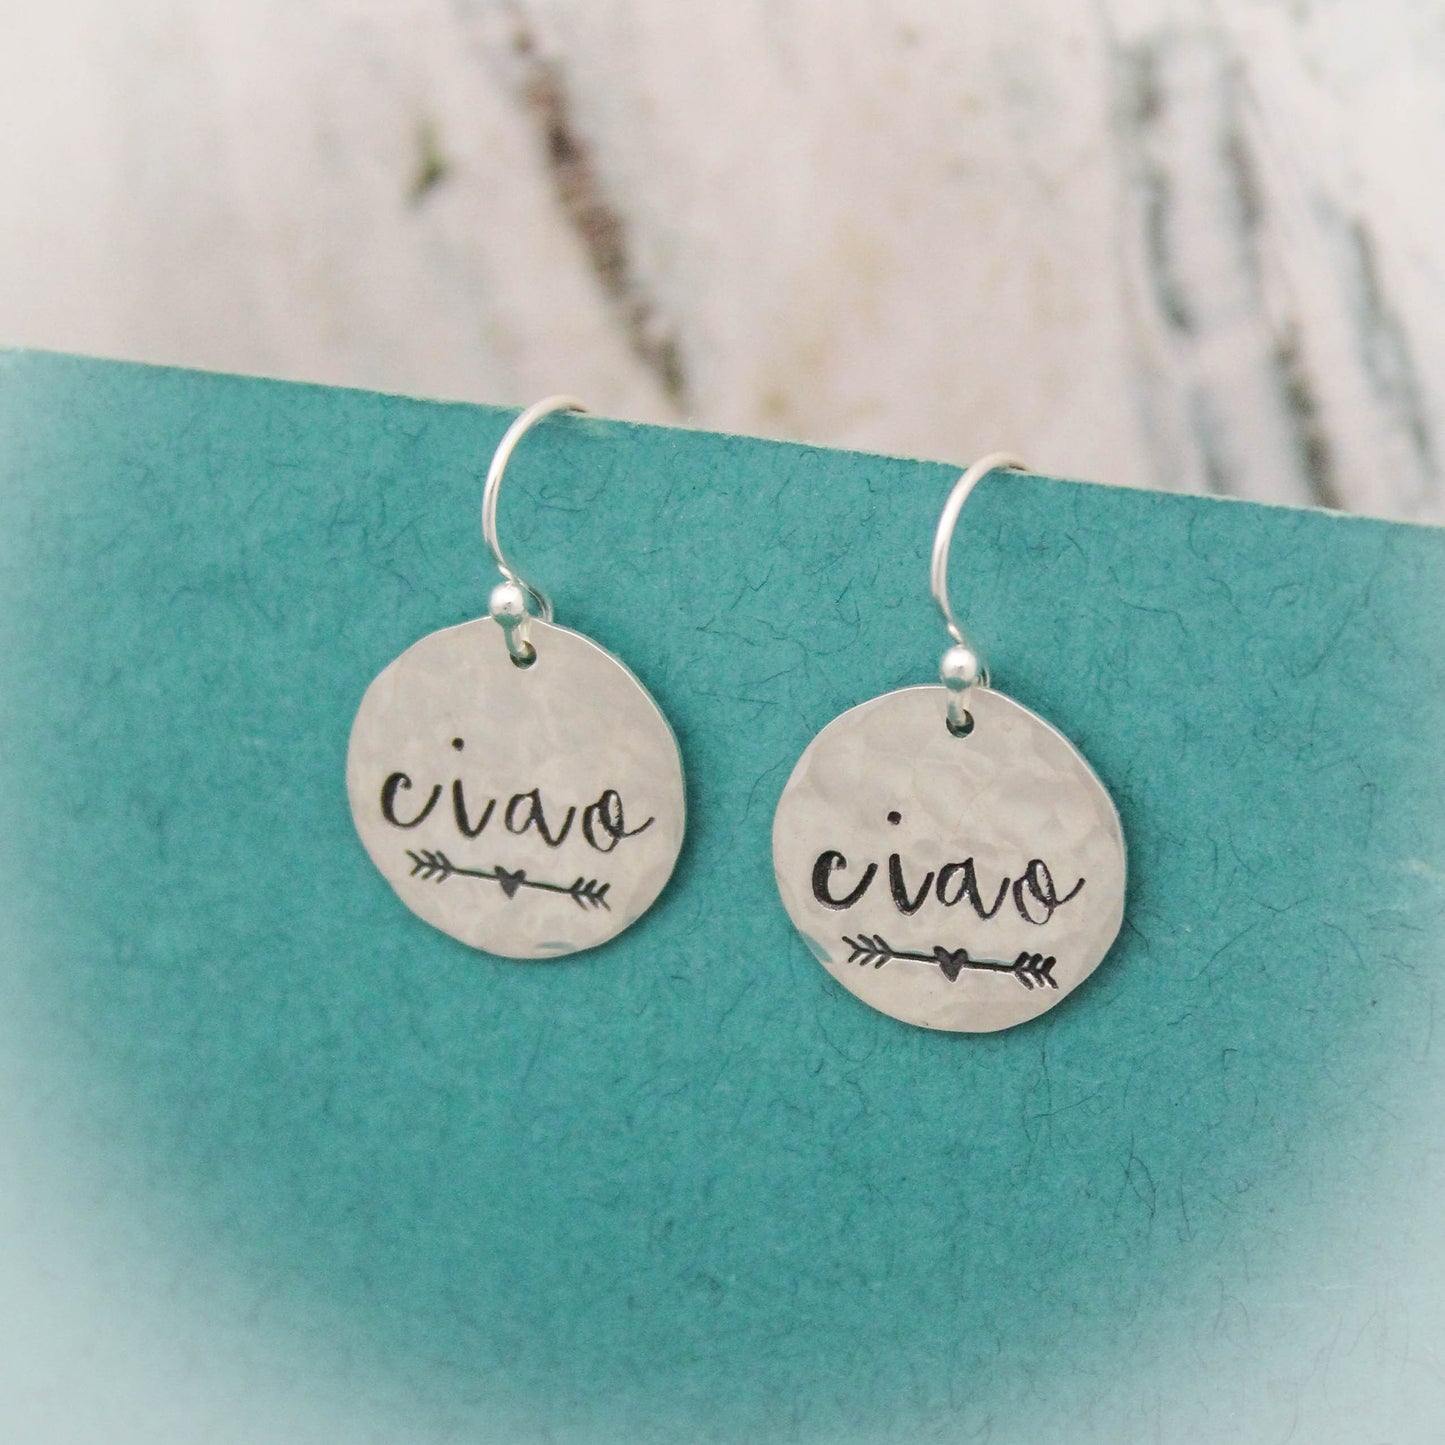 Ciao Italian Earrings in Sterling Silver, Unique Hand Stamped Jewelry, Hand Stamped Earrings, Gifts for Her, Fun Hello Hi Italian Jewelry